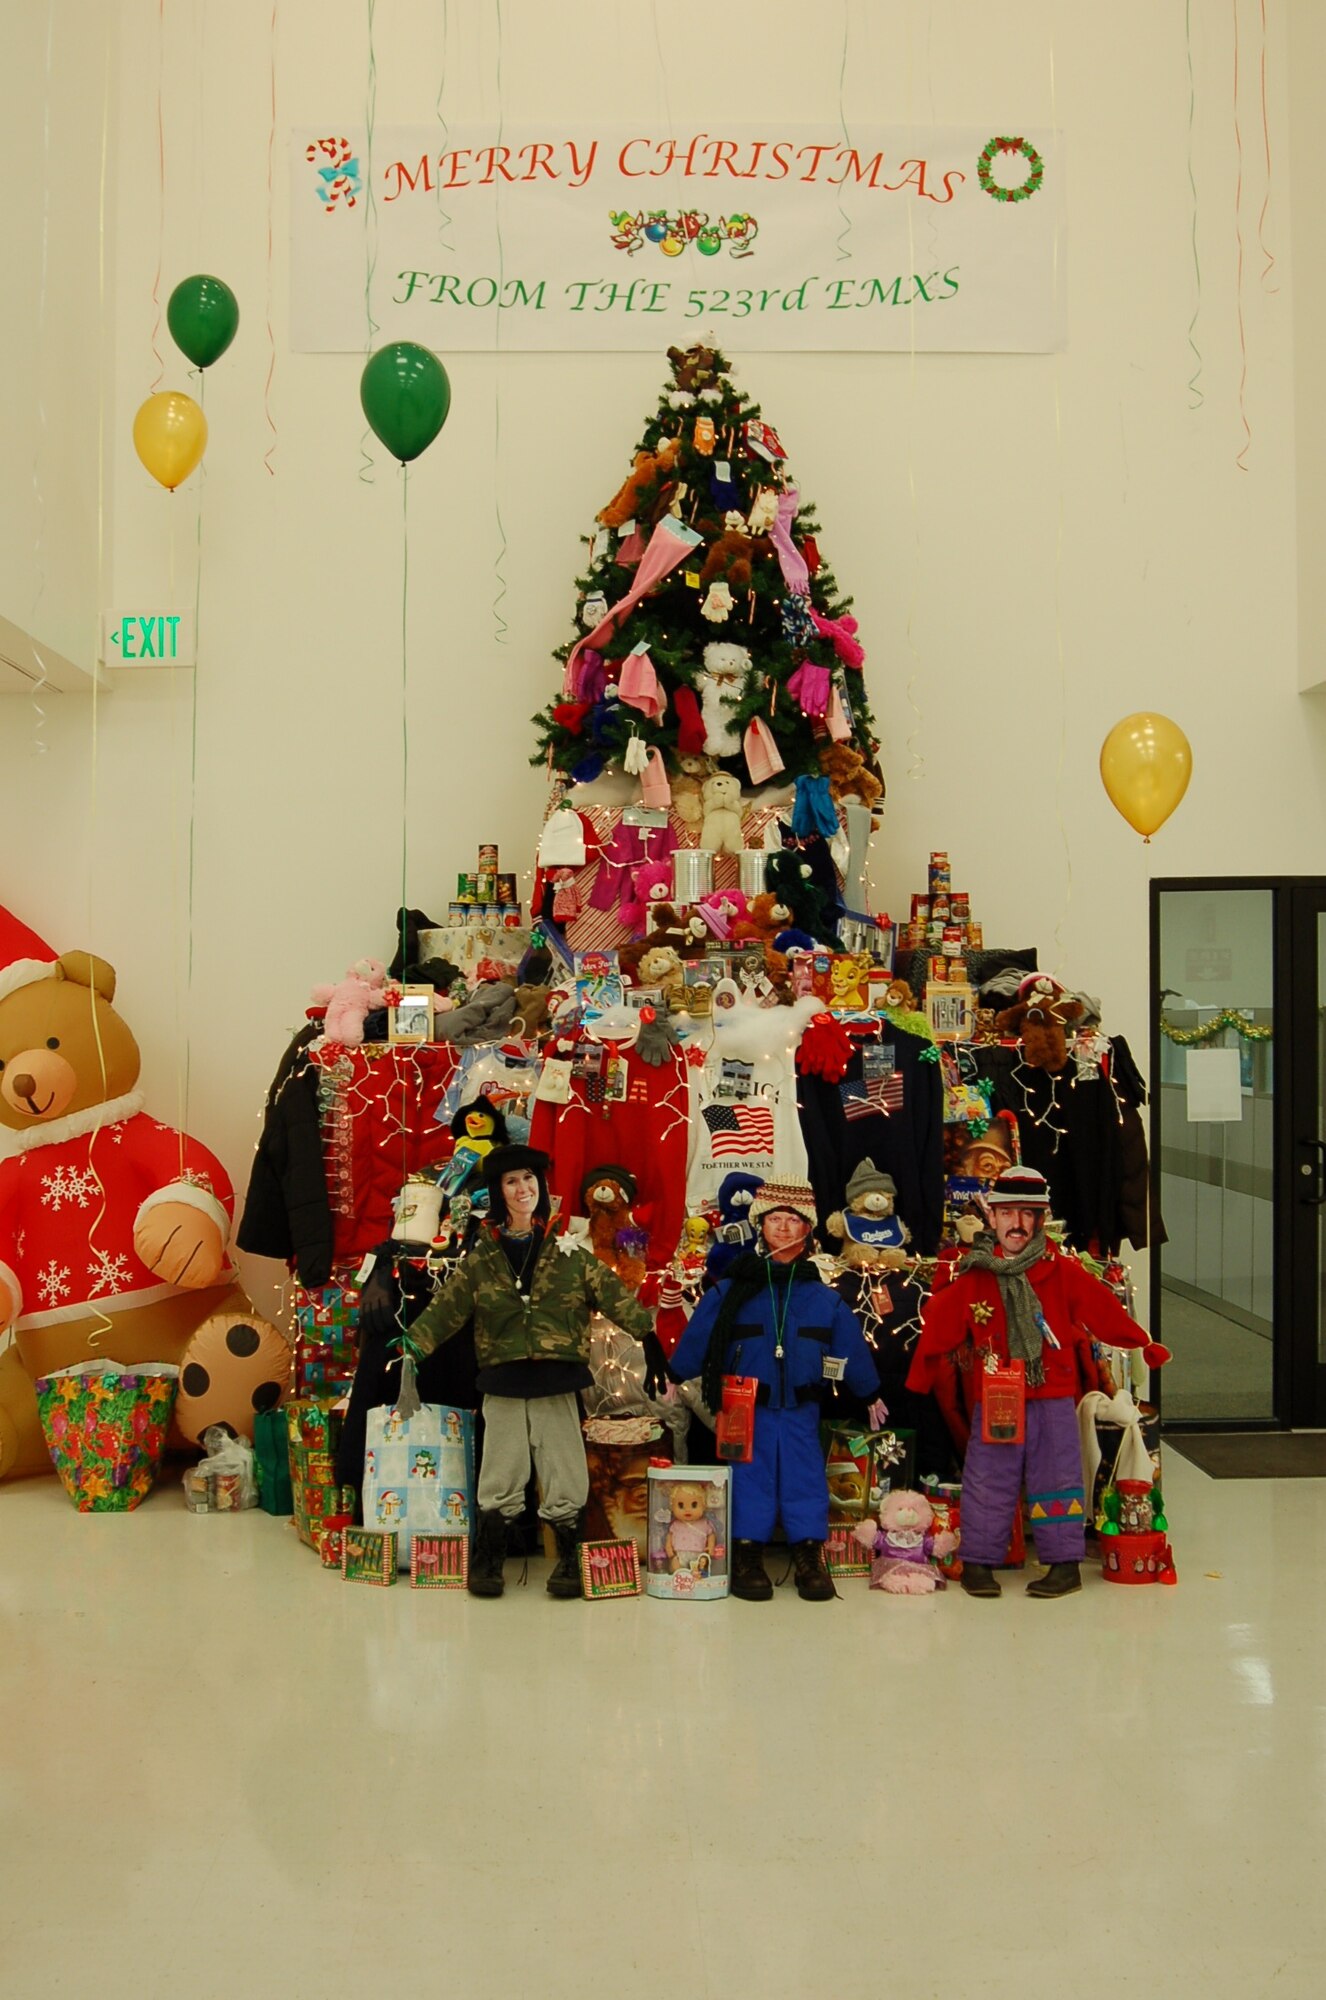 A nearly 14-foot “can tree” decorated by the 523rd Electronics Maintenance Group, towers nearly 14 feet in Bldg. 5, decorated with sweaters, coats, scarves, sweatshirts, shoes, toys and food items. The five 309 EMXG squadrons held a competition to collect food items and display them in a Christmas setting, and the 523rd entry was selected as “most creative.”  The more than 2,200 food items, clothing and toys collected will be taken to local charities.